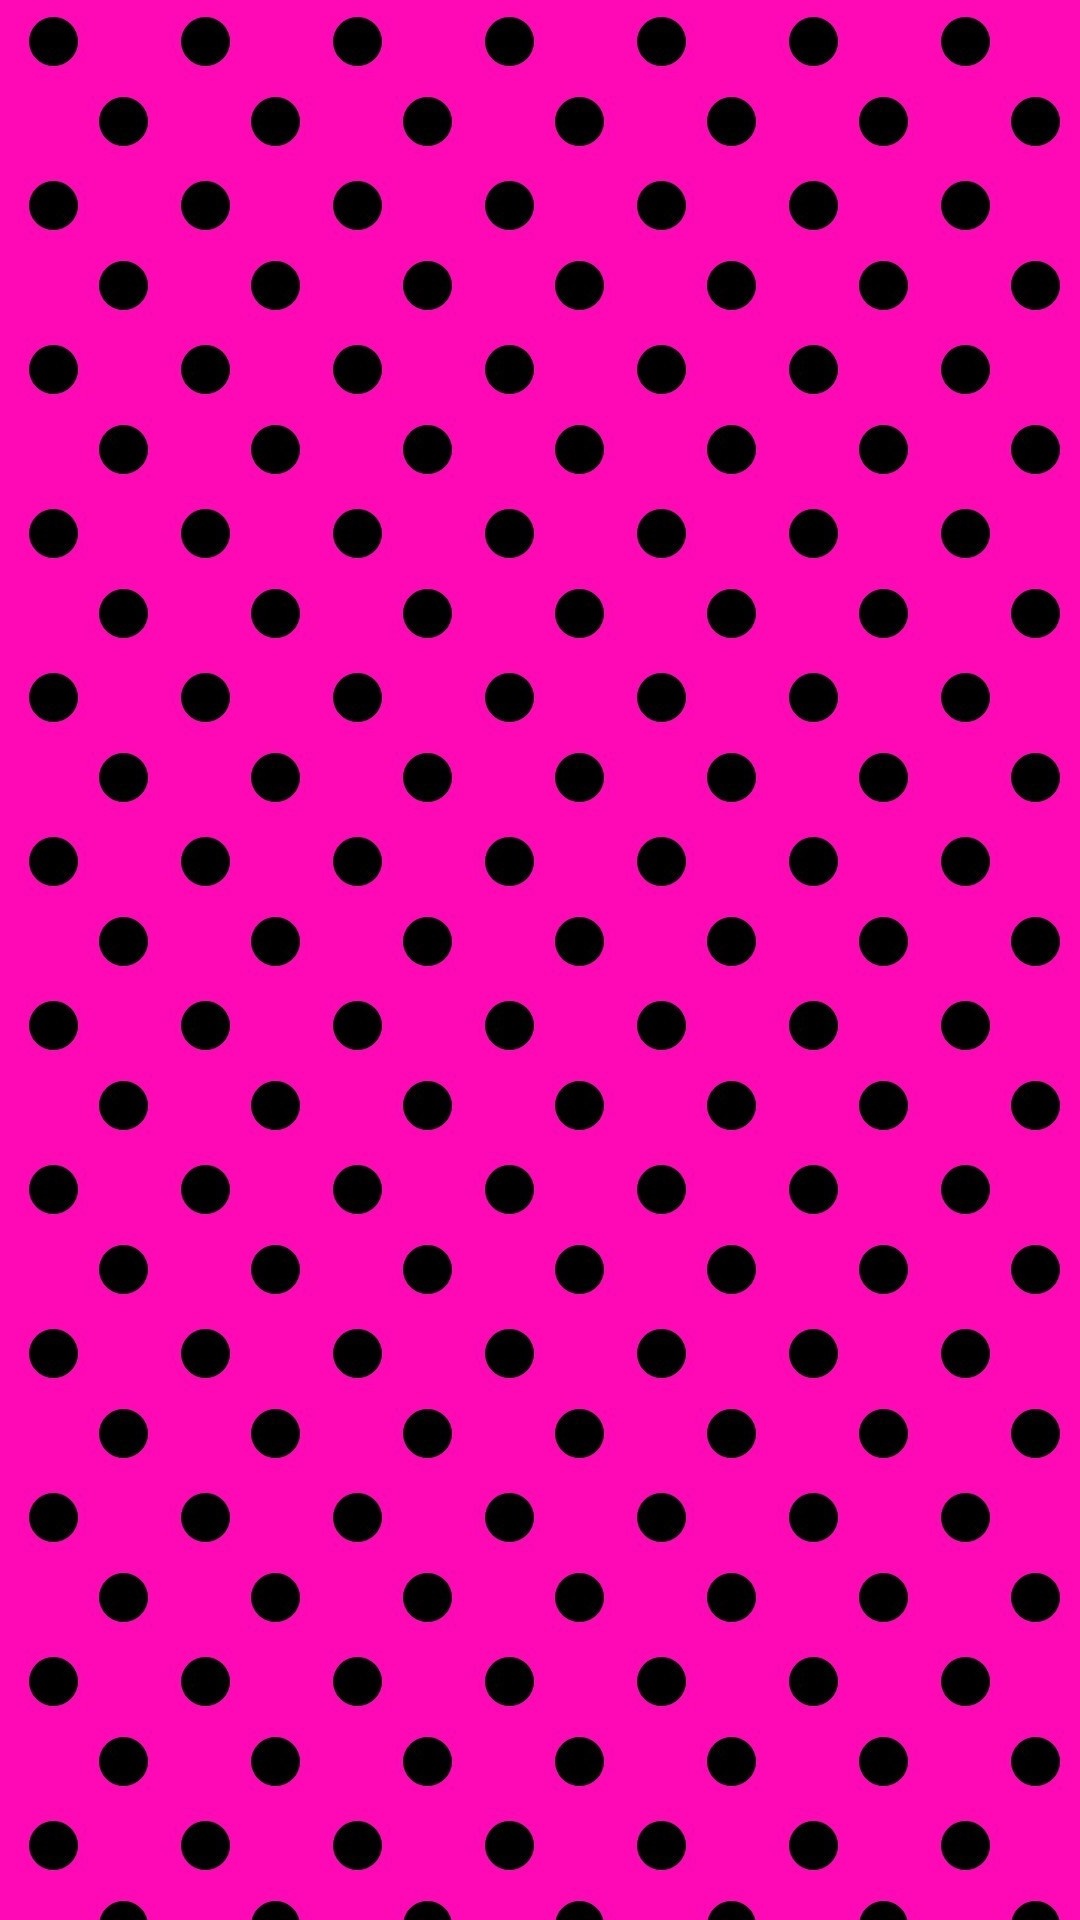 Polka Dot, Pink color palette, Elegant and stylish, Girly vibes, 1080x1920 Full HD Handy